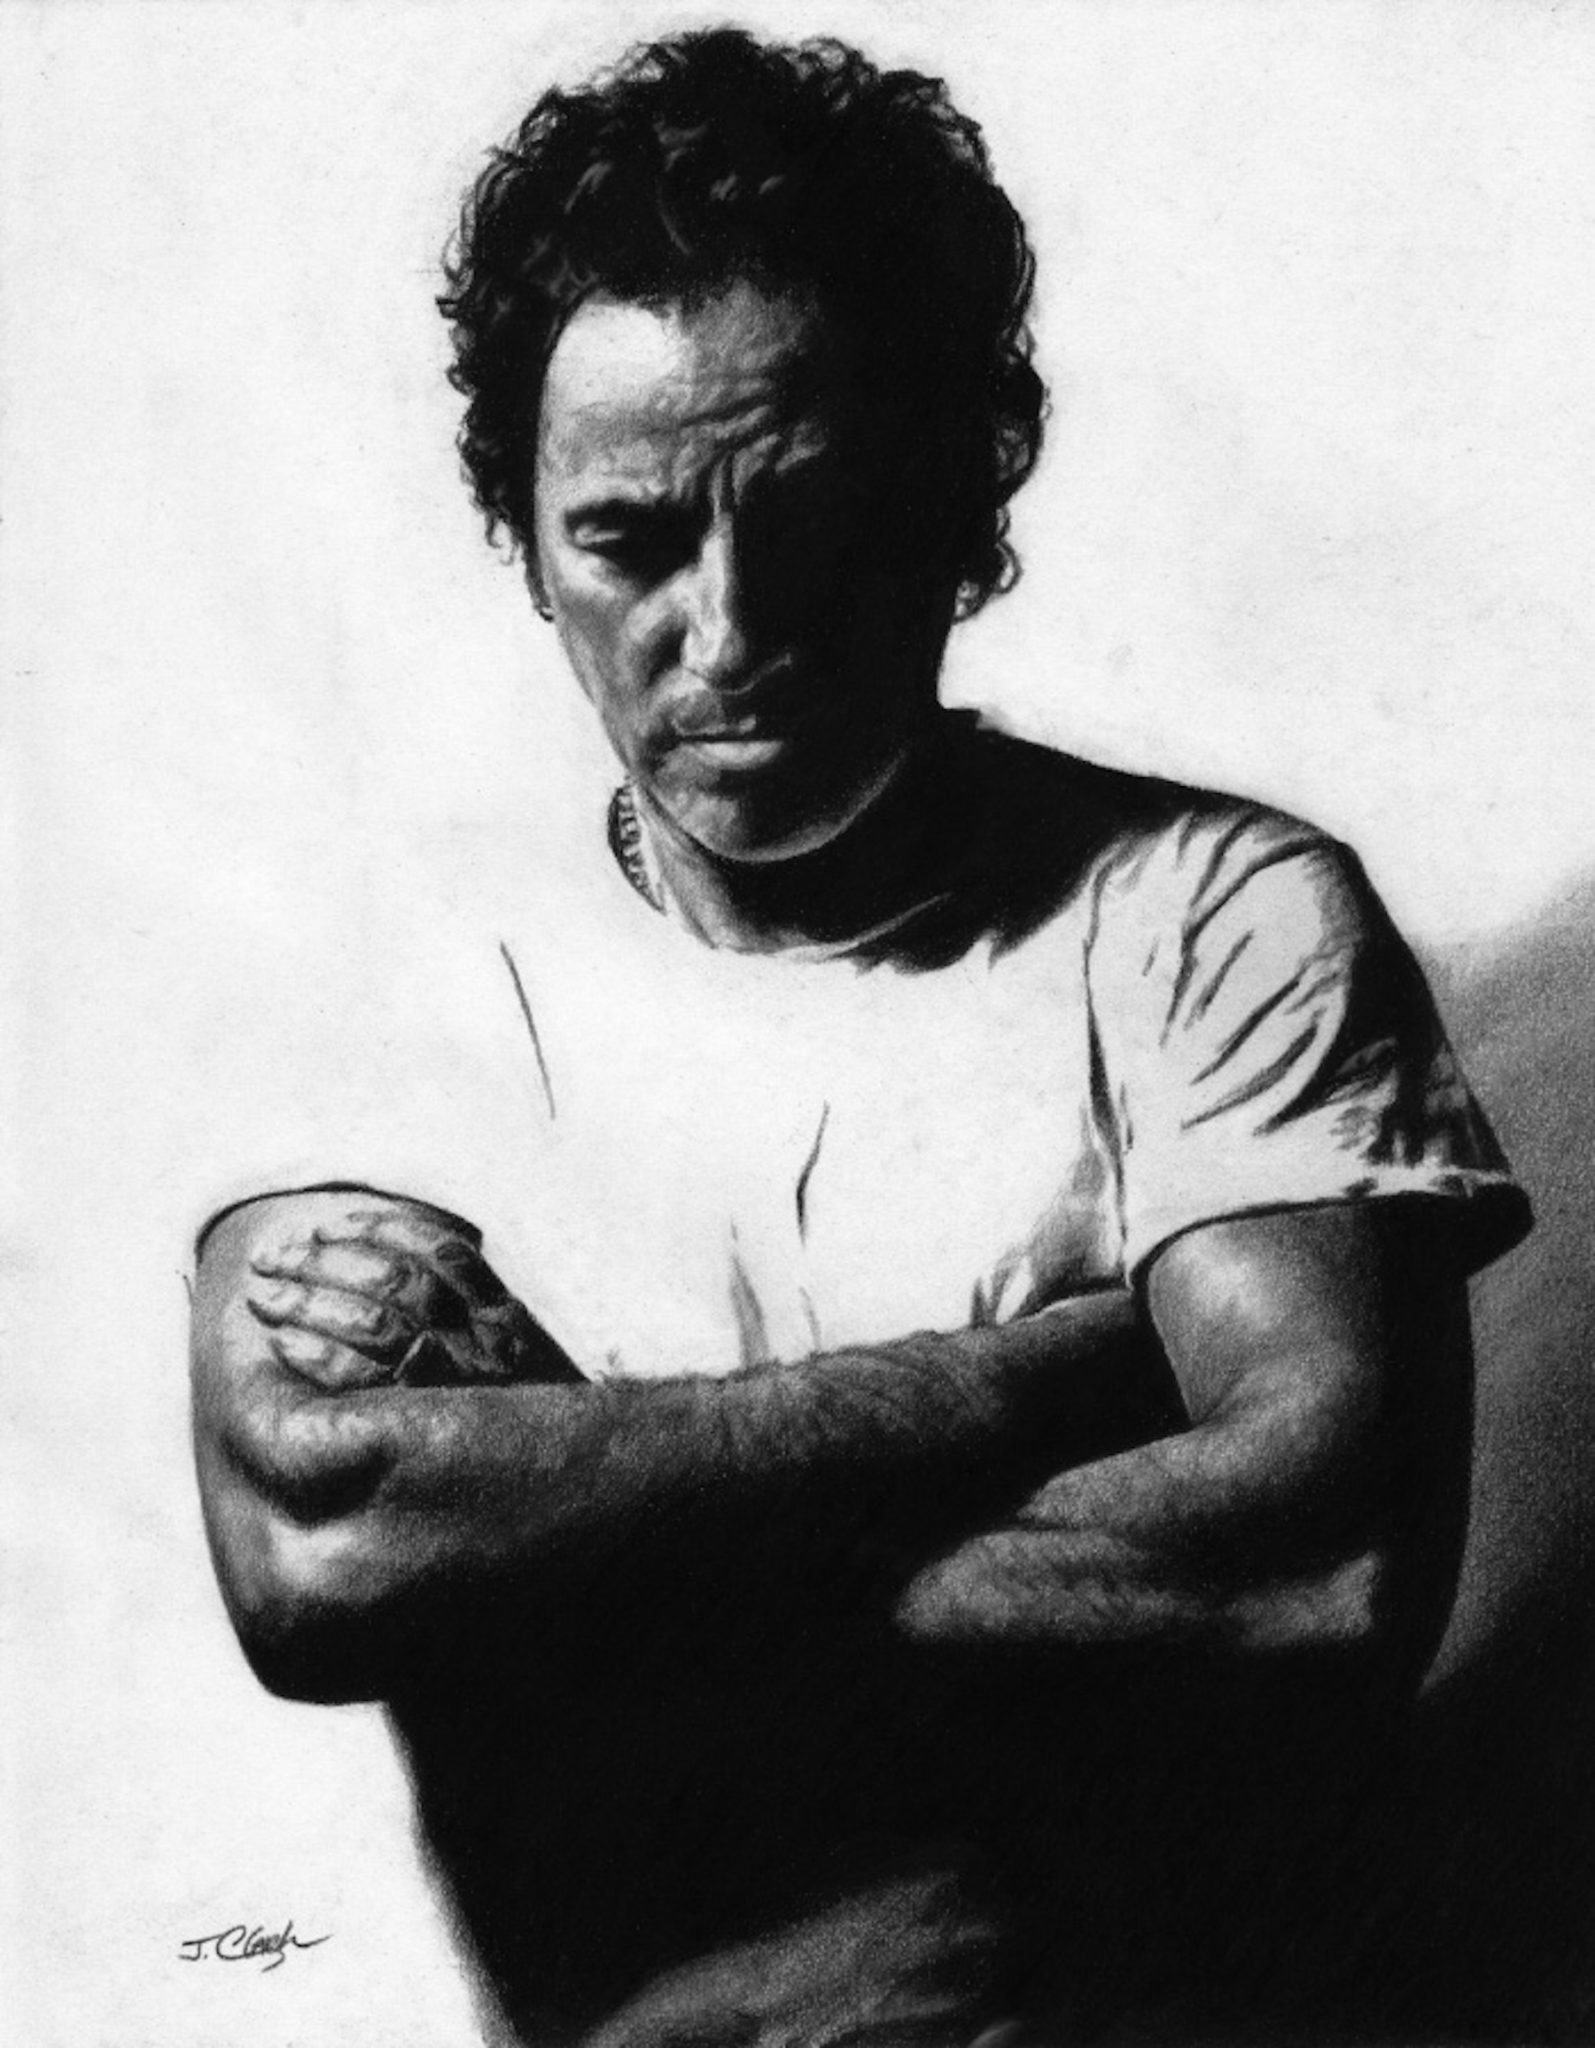 Rock and roll legend Bruce Springsteen depicted in a pencil sketch wearing a white t-shirt with his arms crossed